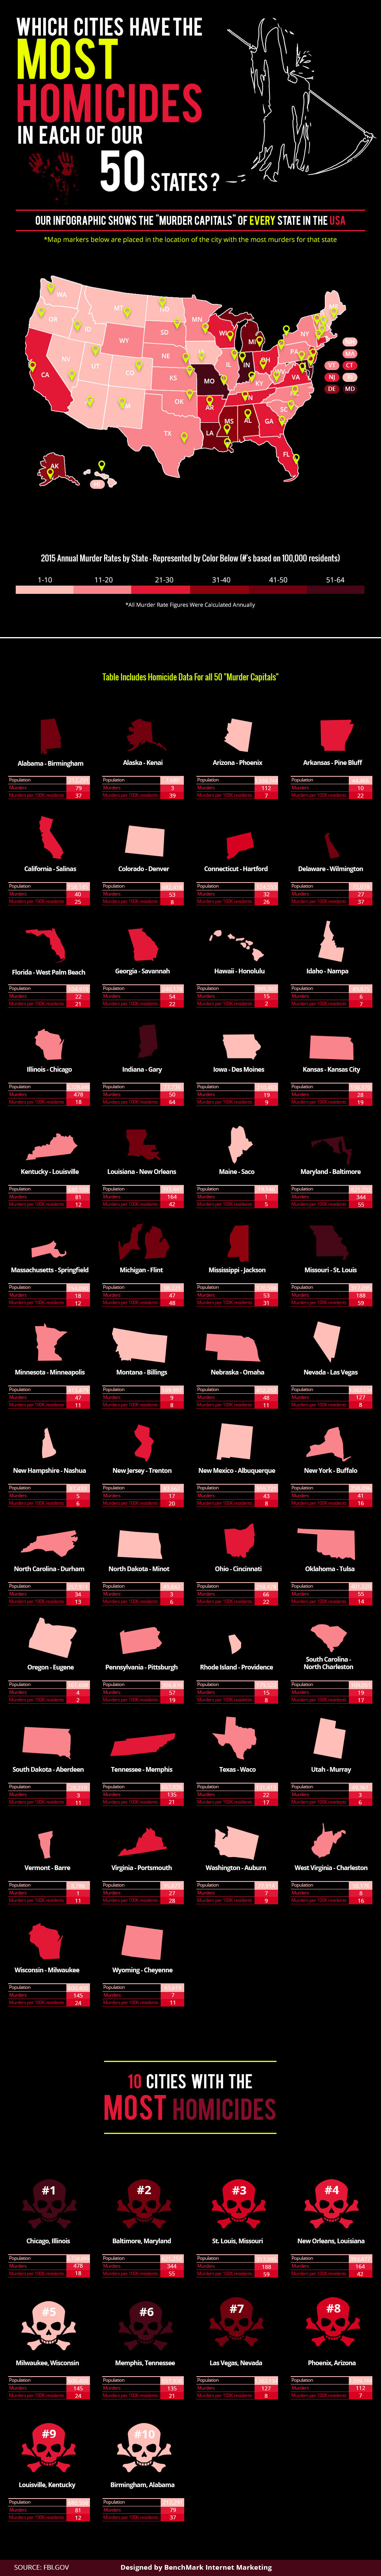 Which Cities Have the Most Homicides in Each of Our 50 States?